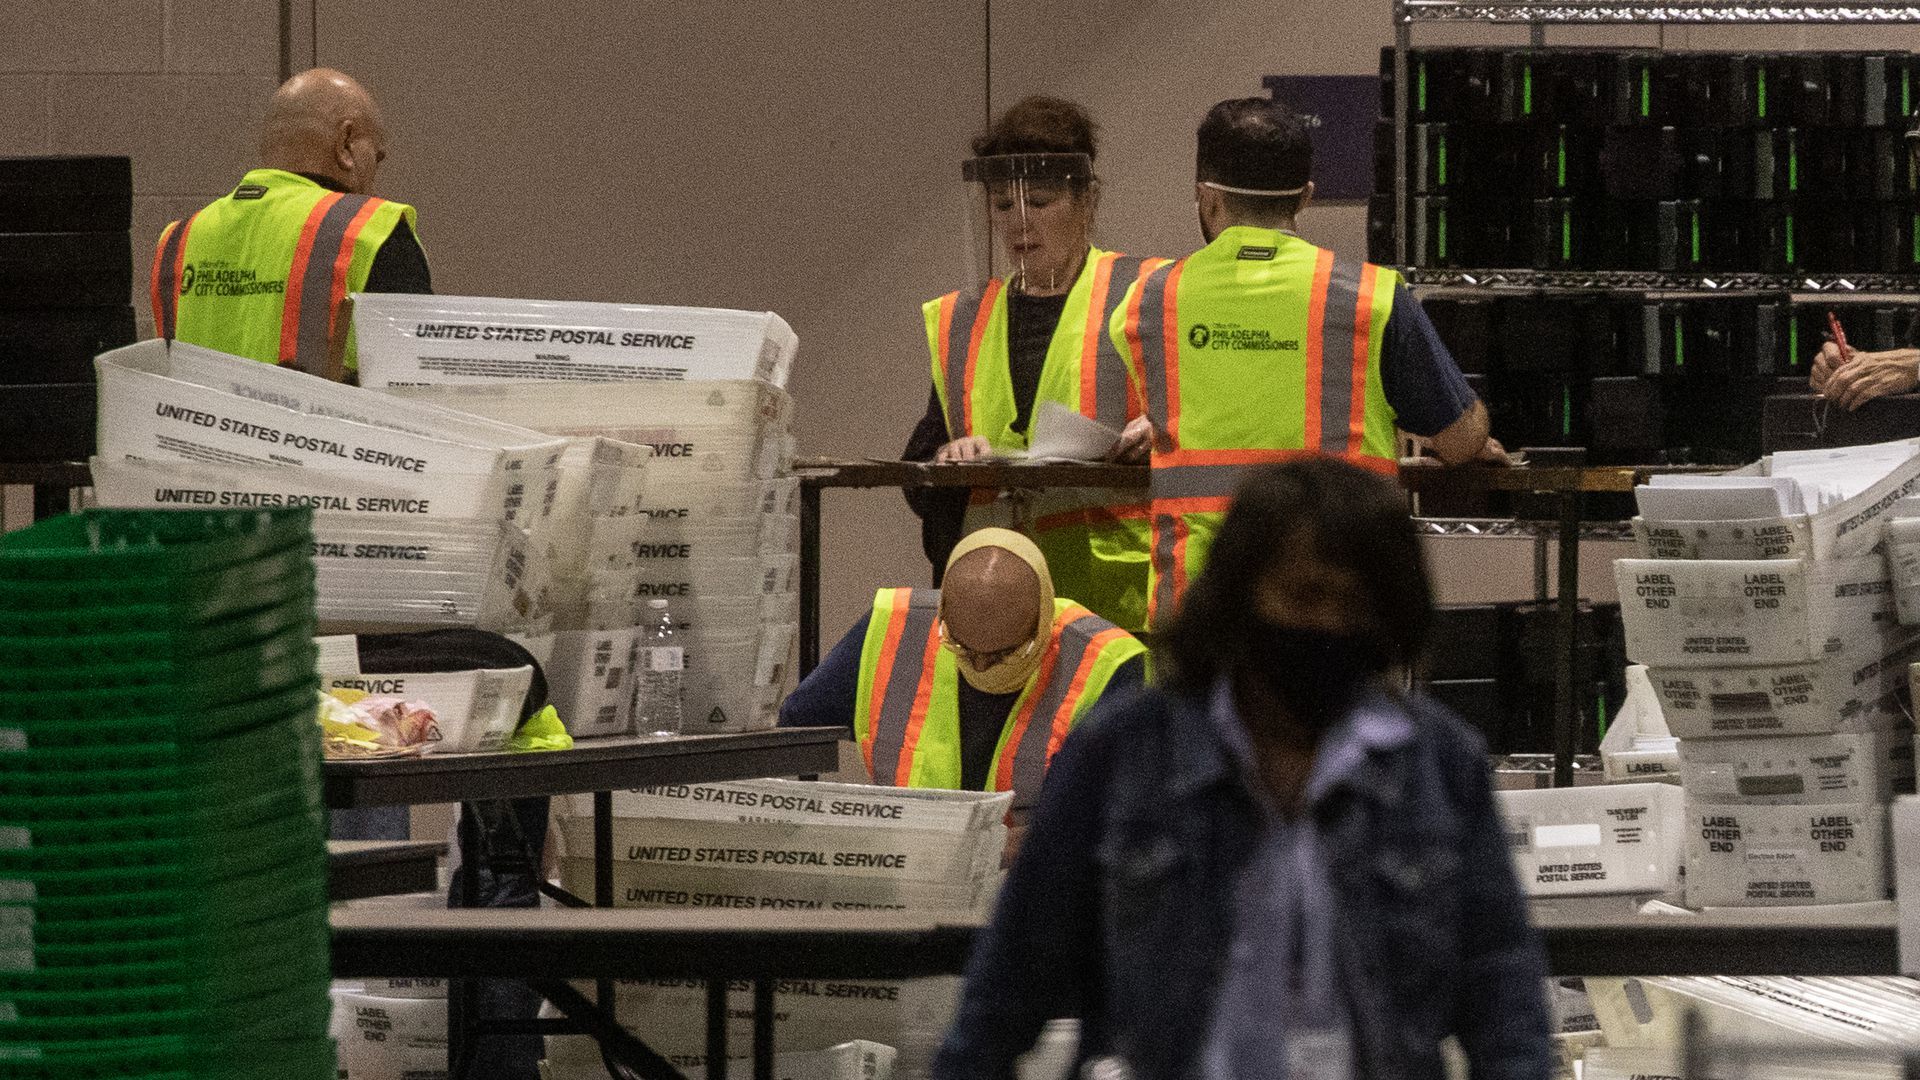 Election workers count ballots at the Philadelphia Convention Center. Photo: Chris McGrath/Getty Images